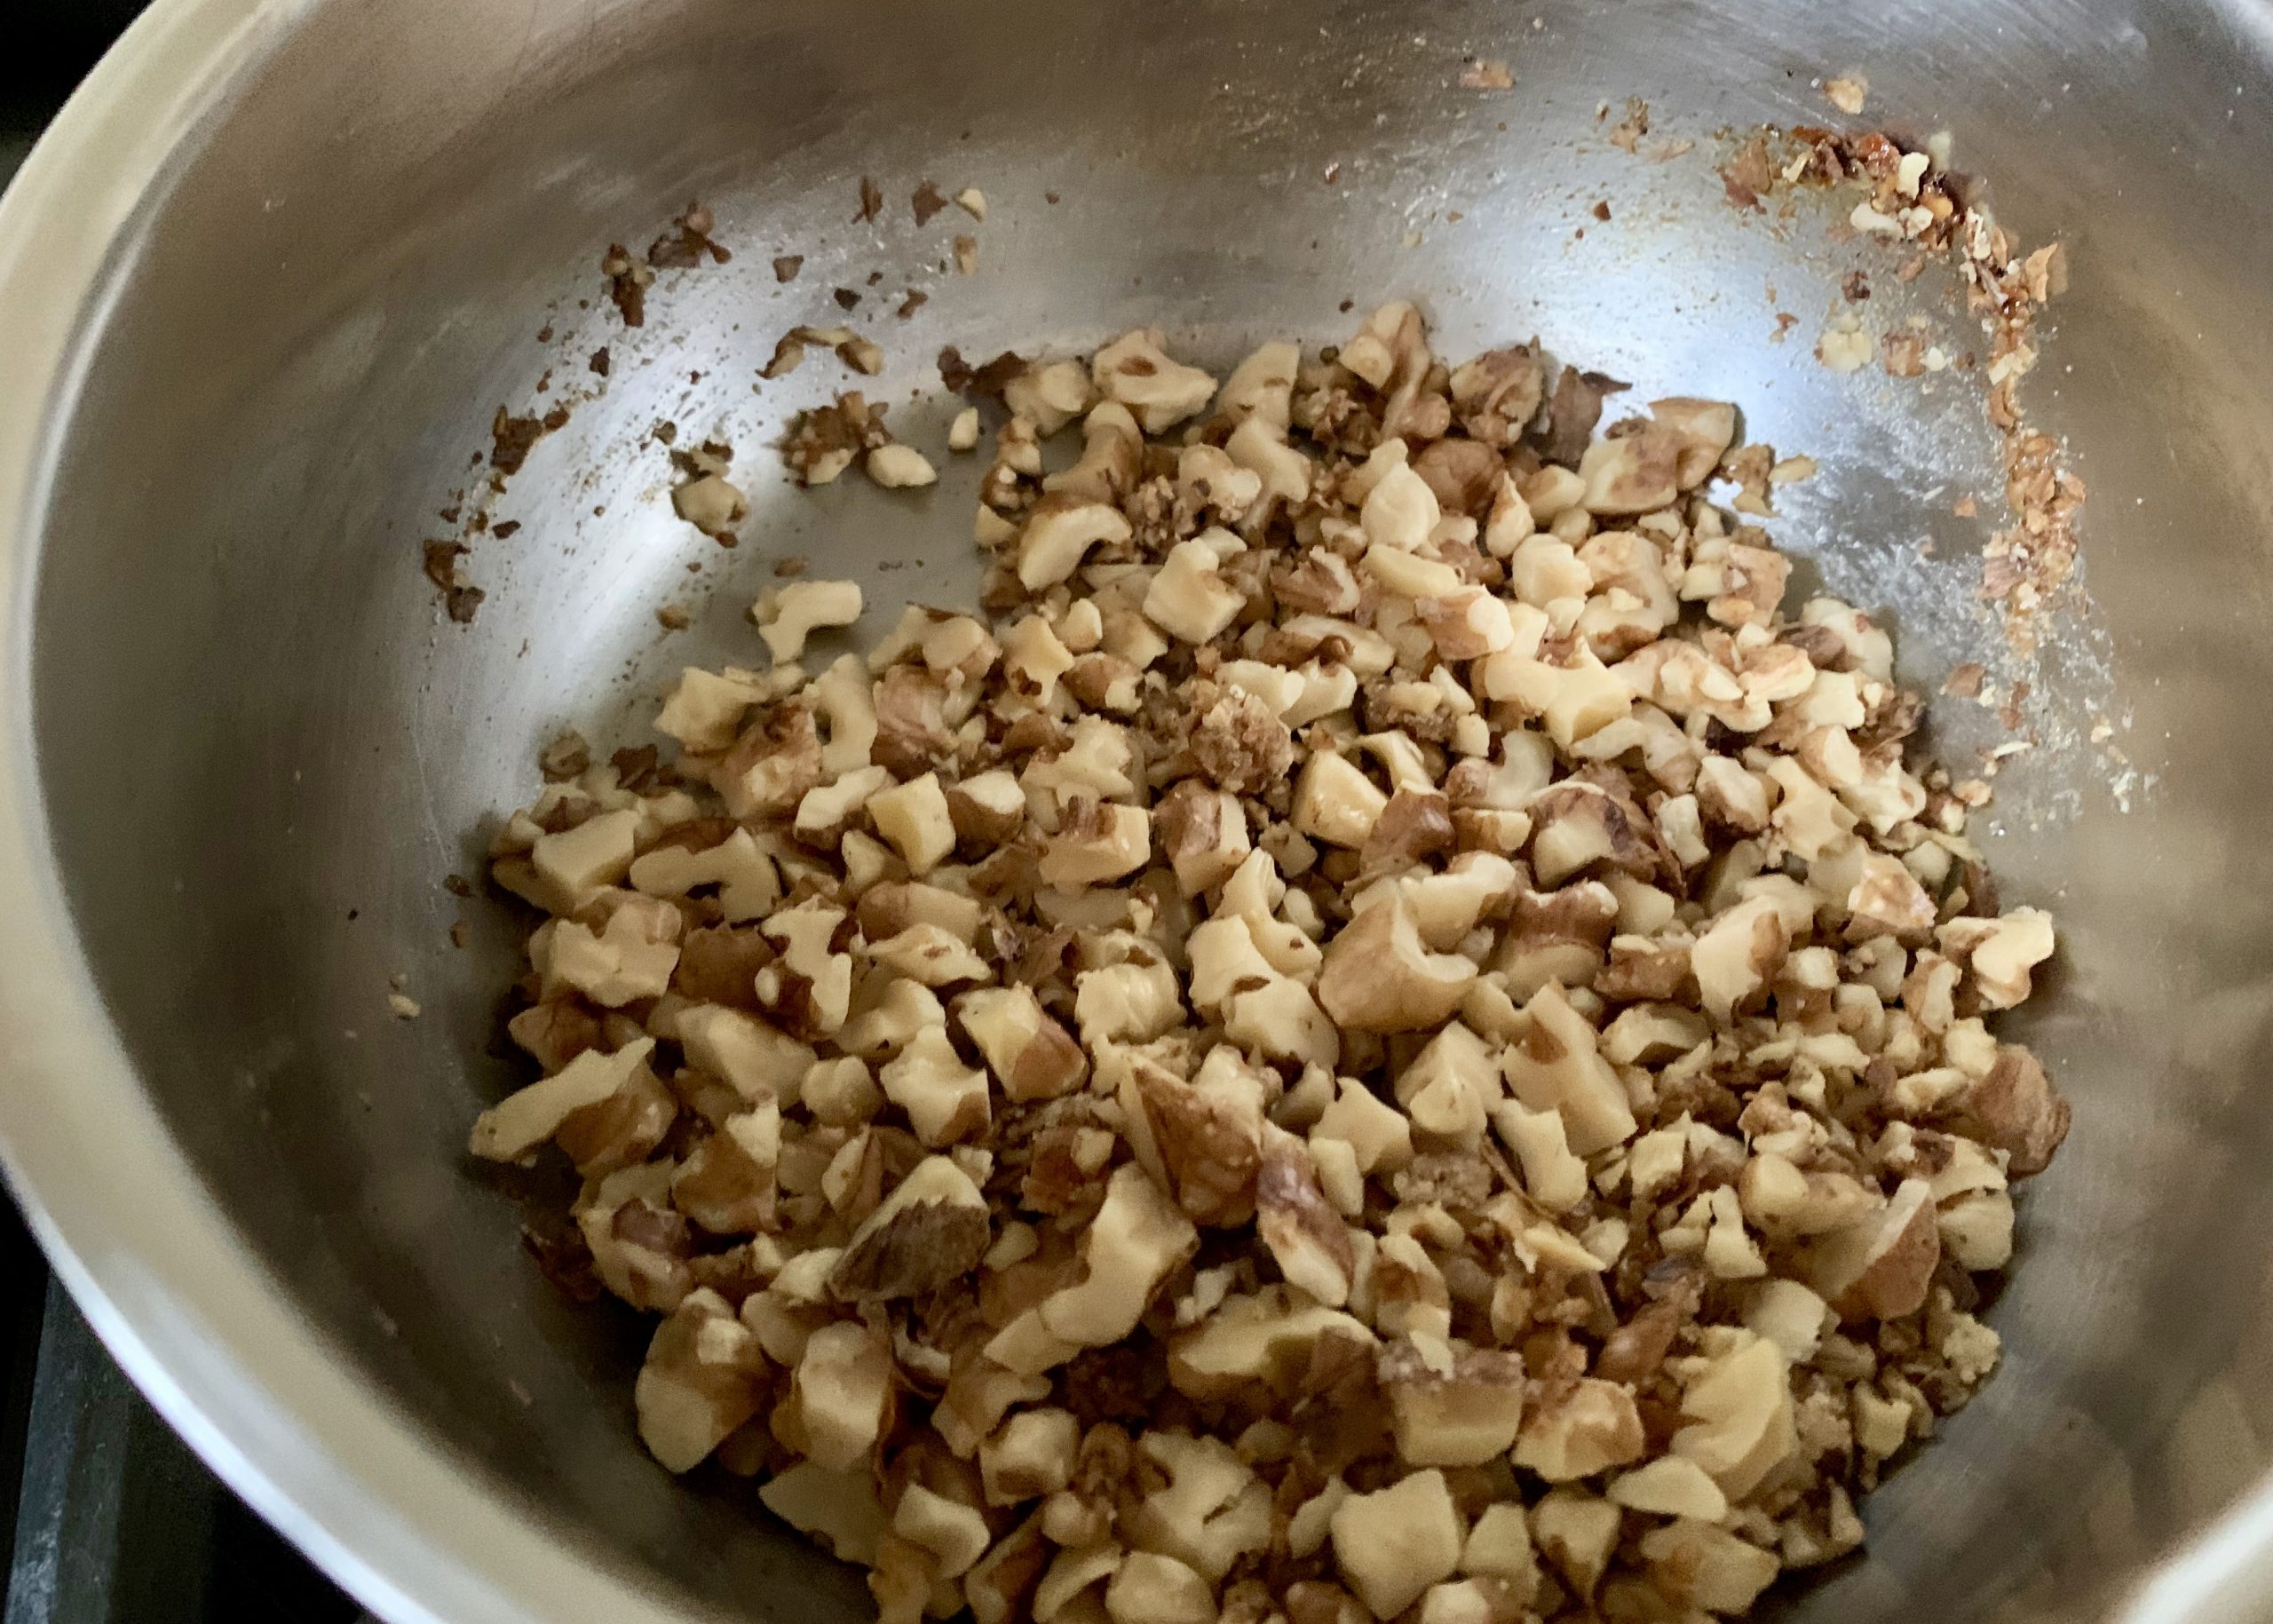 Chopped walnuts with sugar in a pan